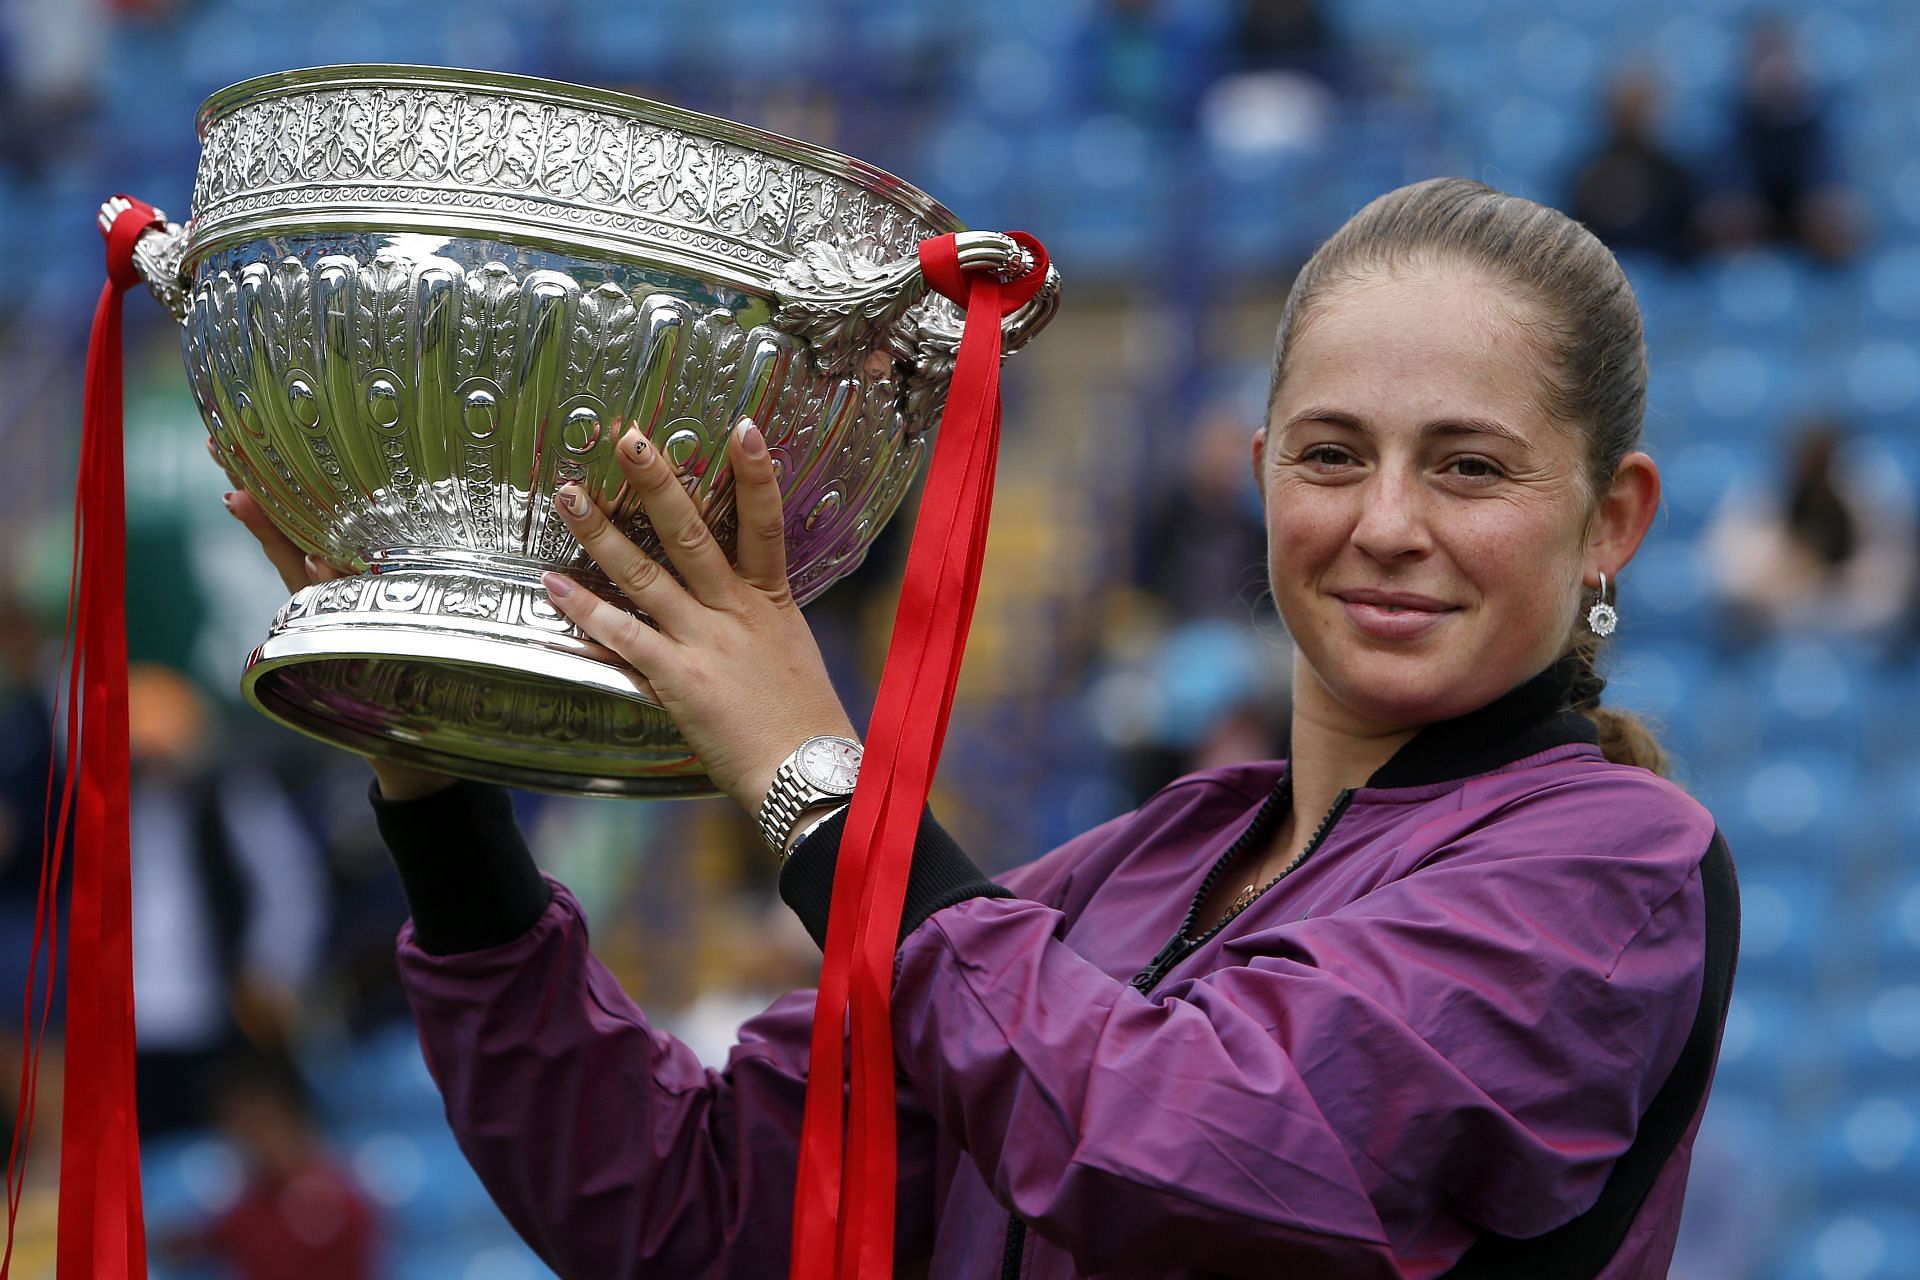 Jelena Ostapenko is the defending champion at the Rothesay International